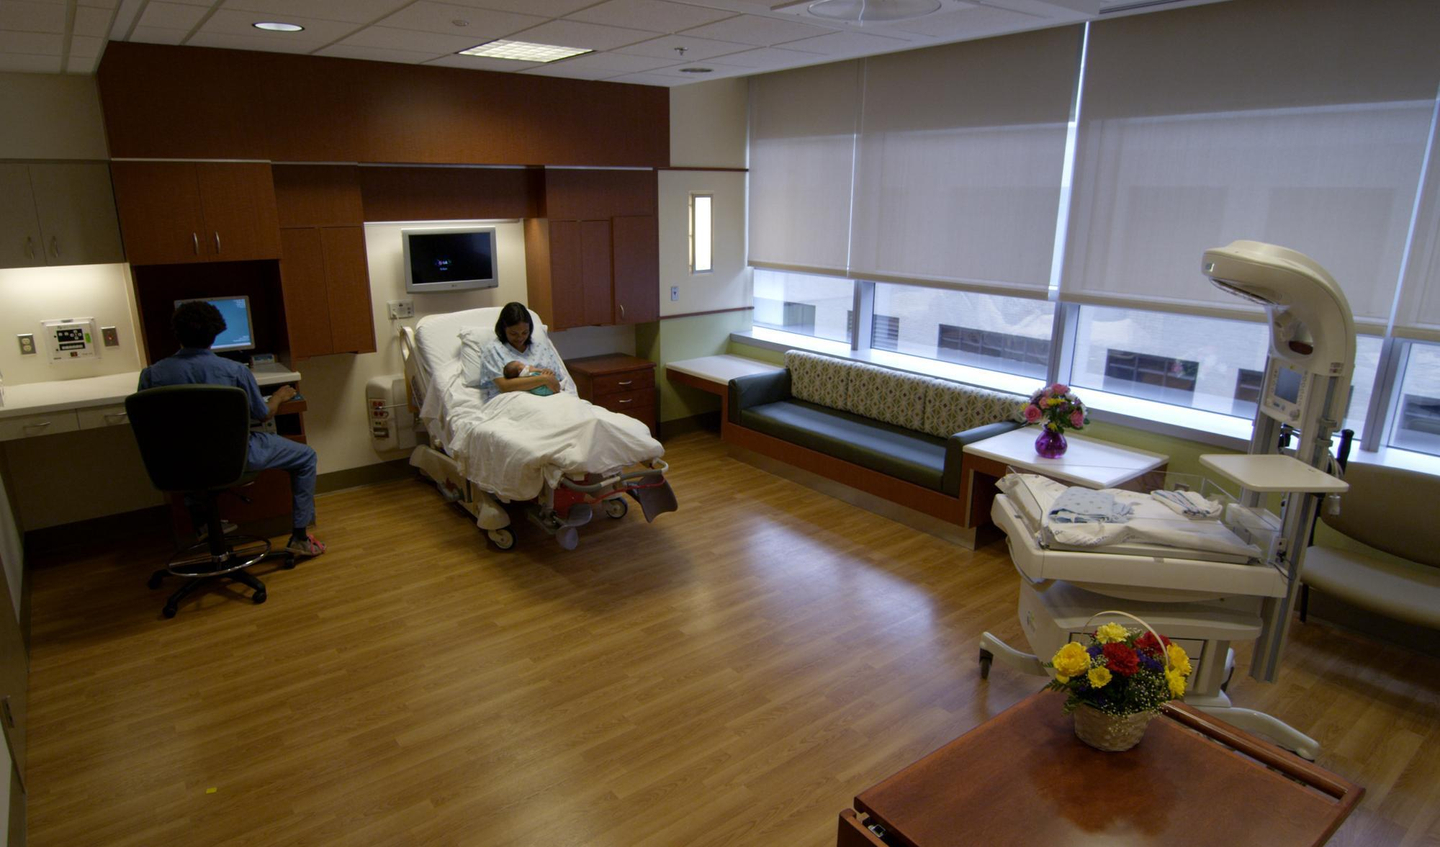 Labor & Delivery Unit Offers Comfort, Private Rooms - Baltimore - Mercy